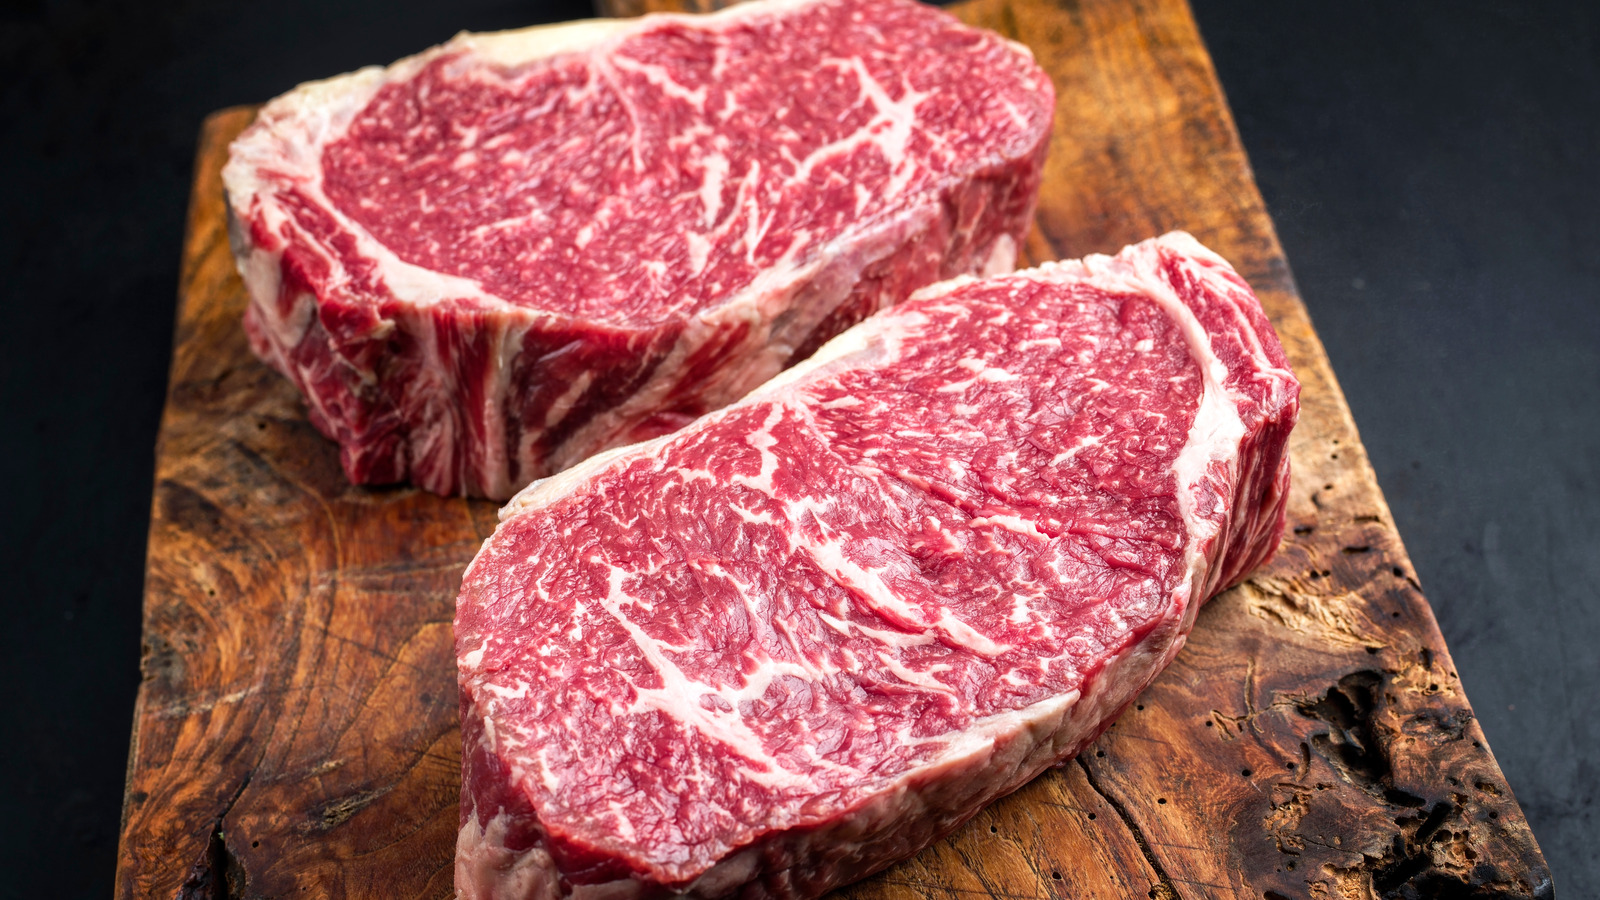 Wagyu beef has several health benefits that you should be aware of